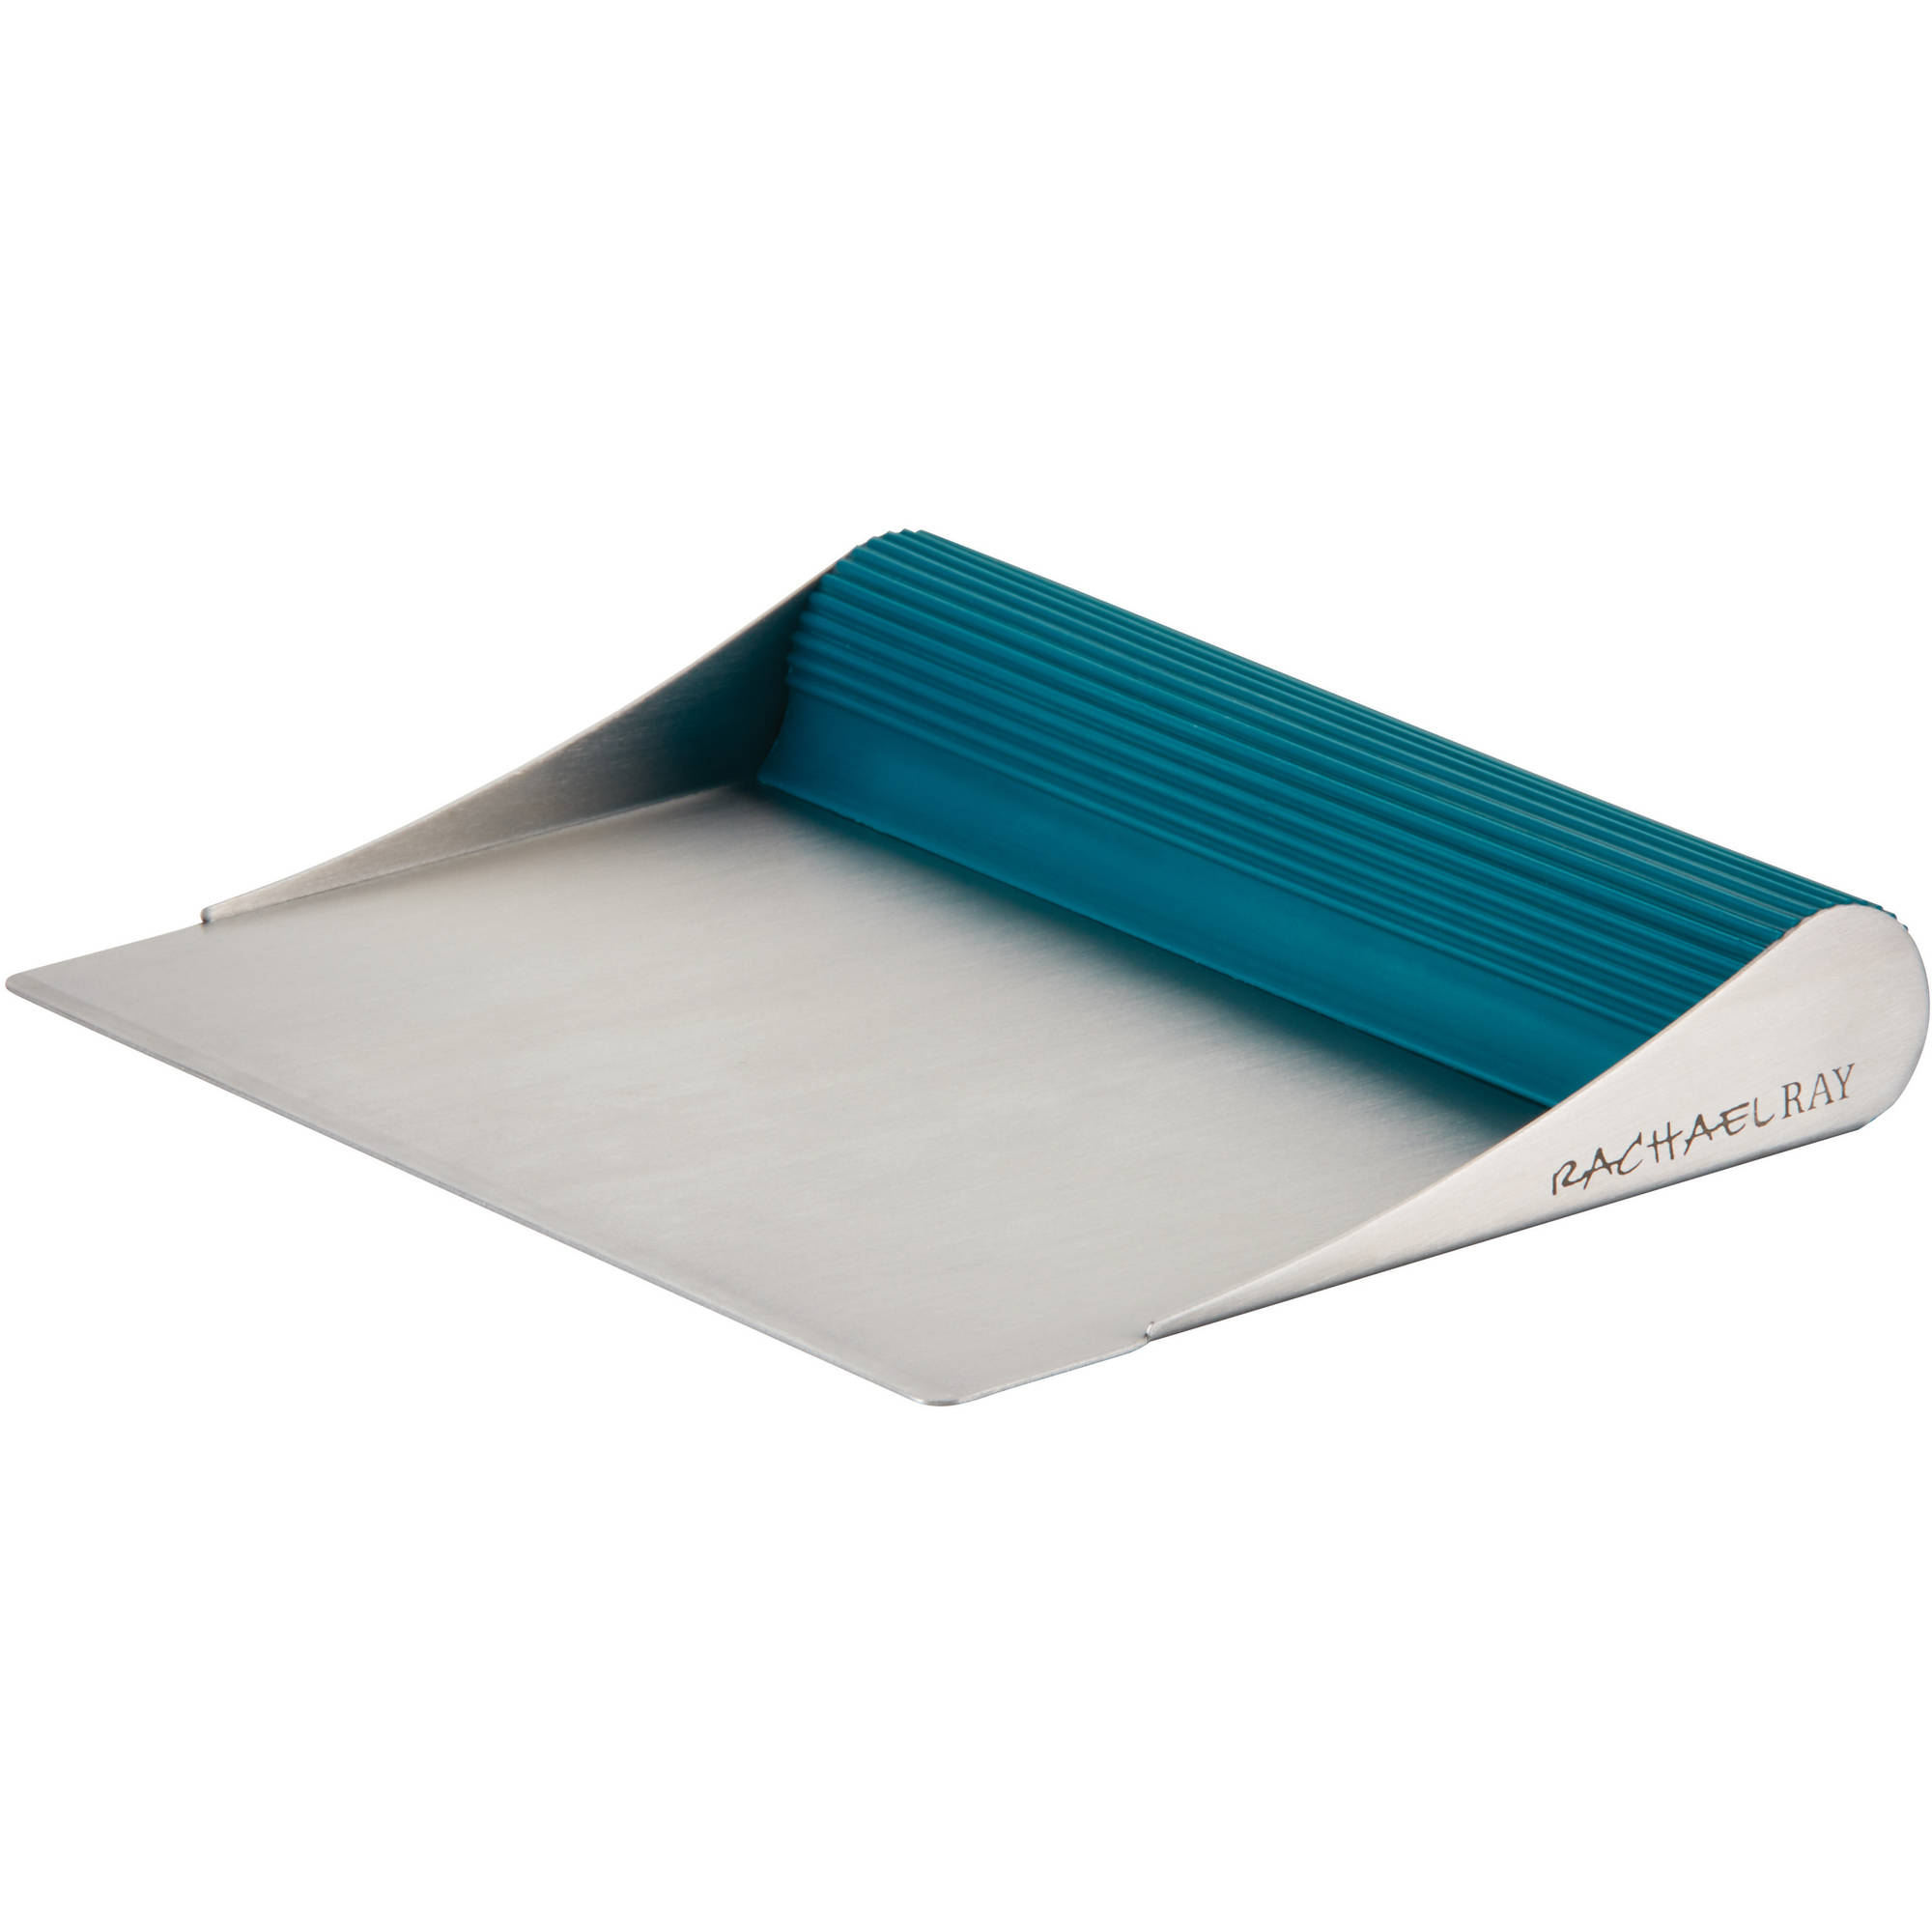 Rachael Ray Stainless Steel Tools & Gadgets Marine Blue Bench Scrape - image 1 of 3